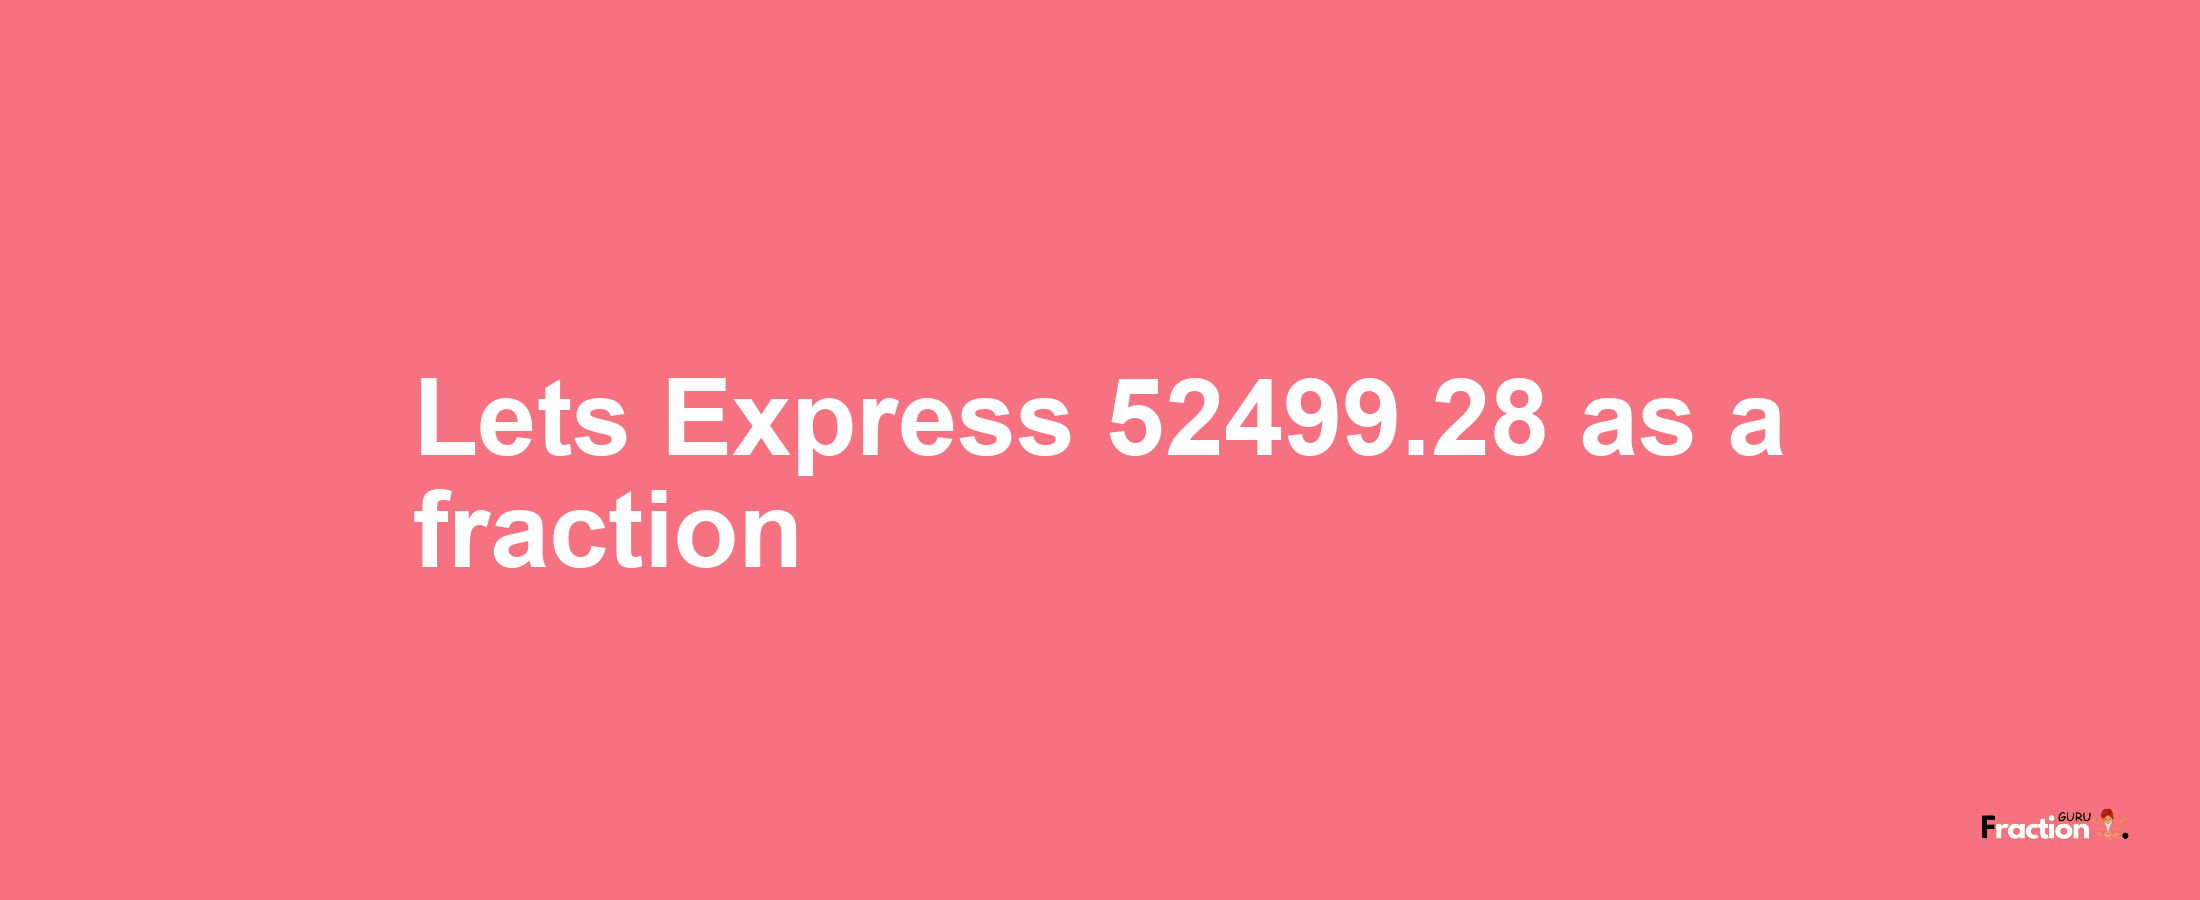 Lets Express 52499.28 as afraction